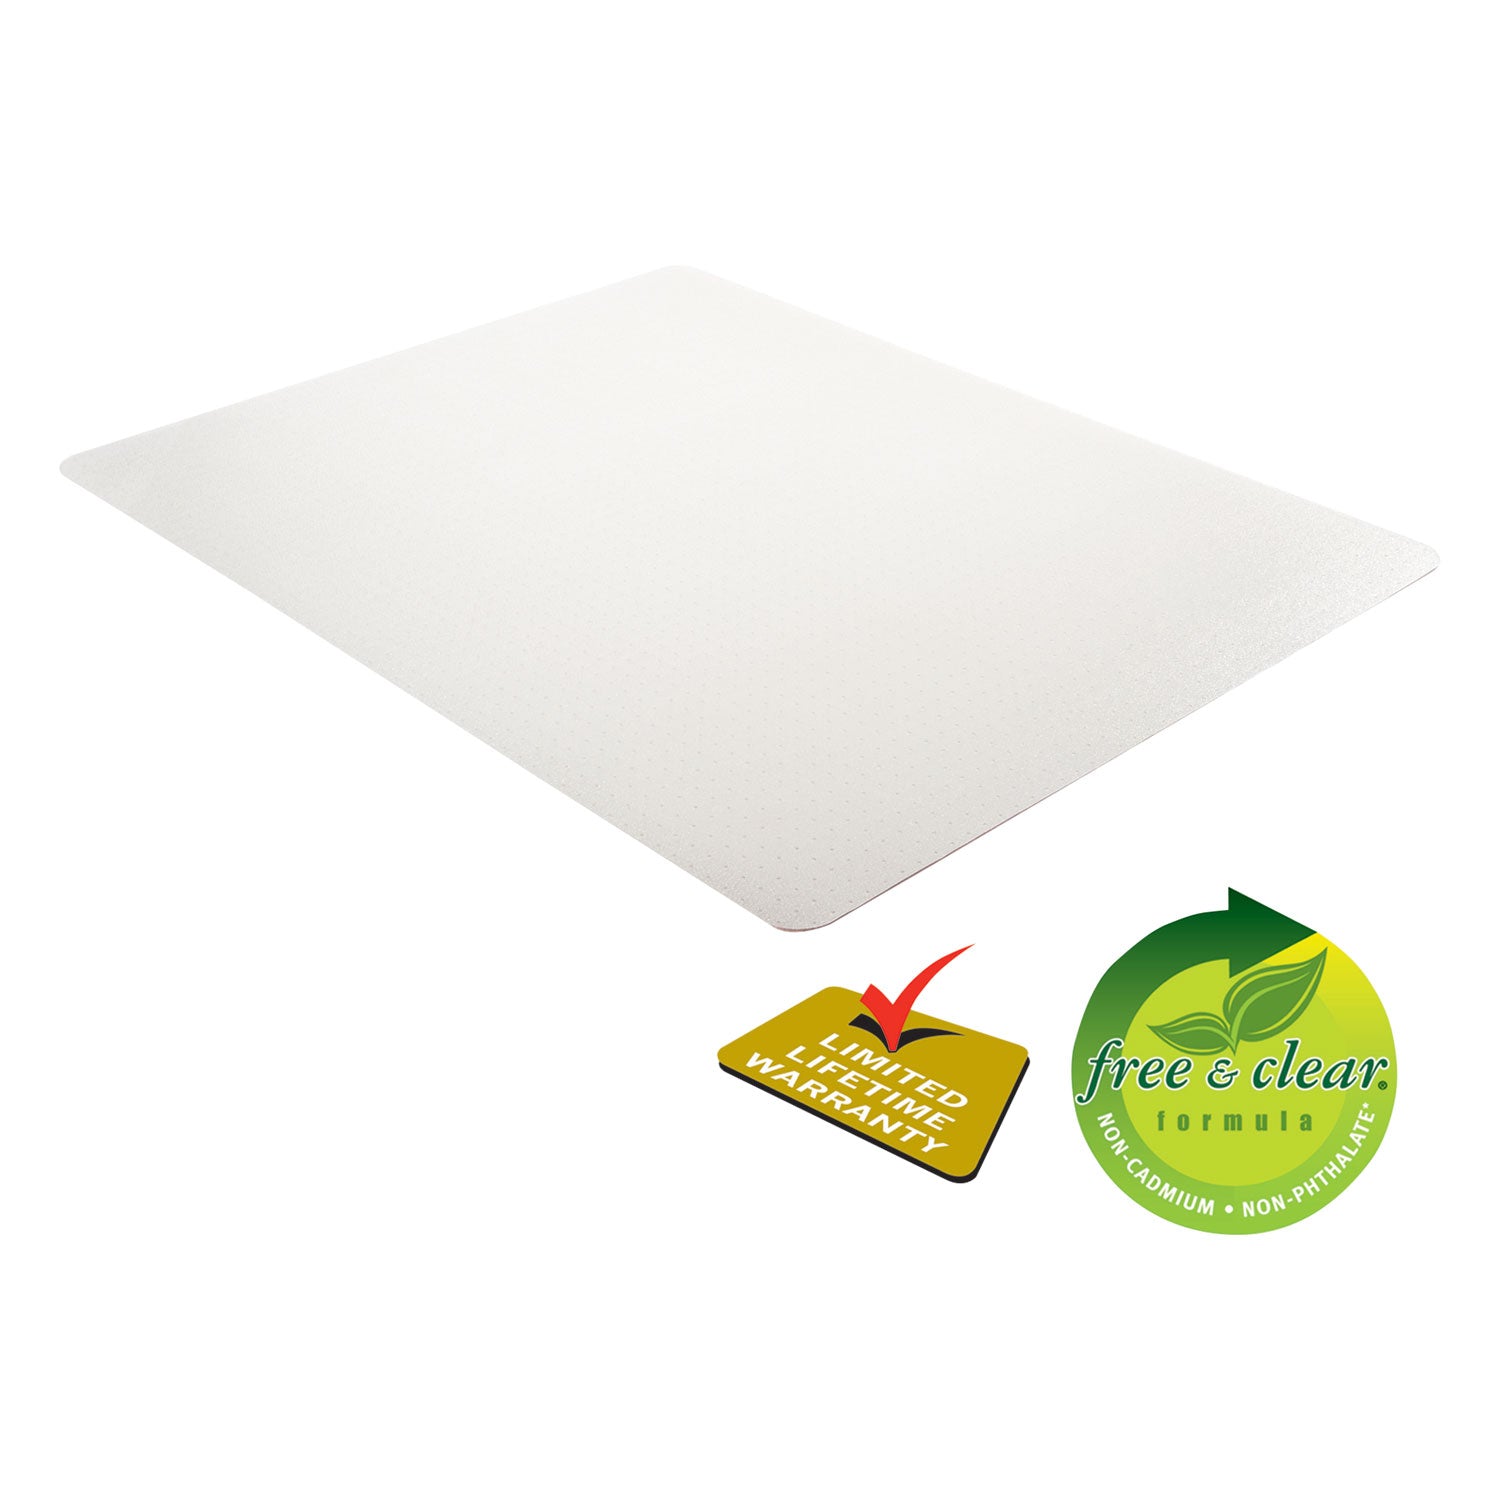 economat-occasional-use-chair-mat-low-pile-carpet-roll-46-x-60-rectangle-clear_defcm11442fcom - 6